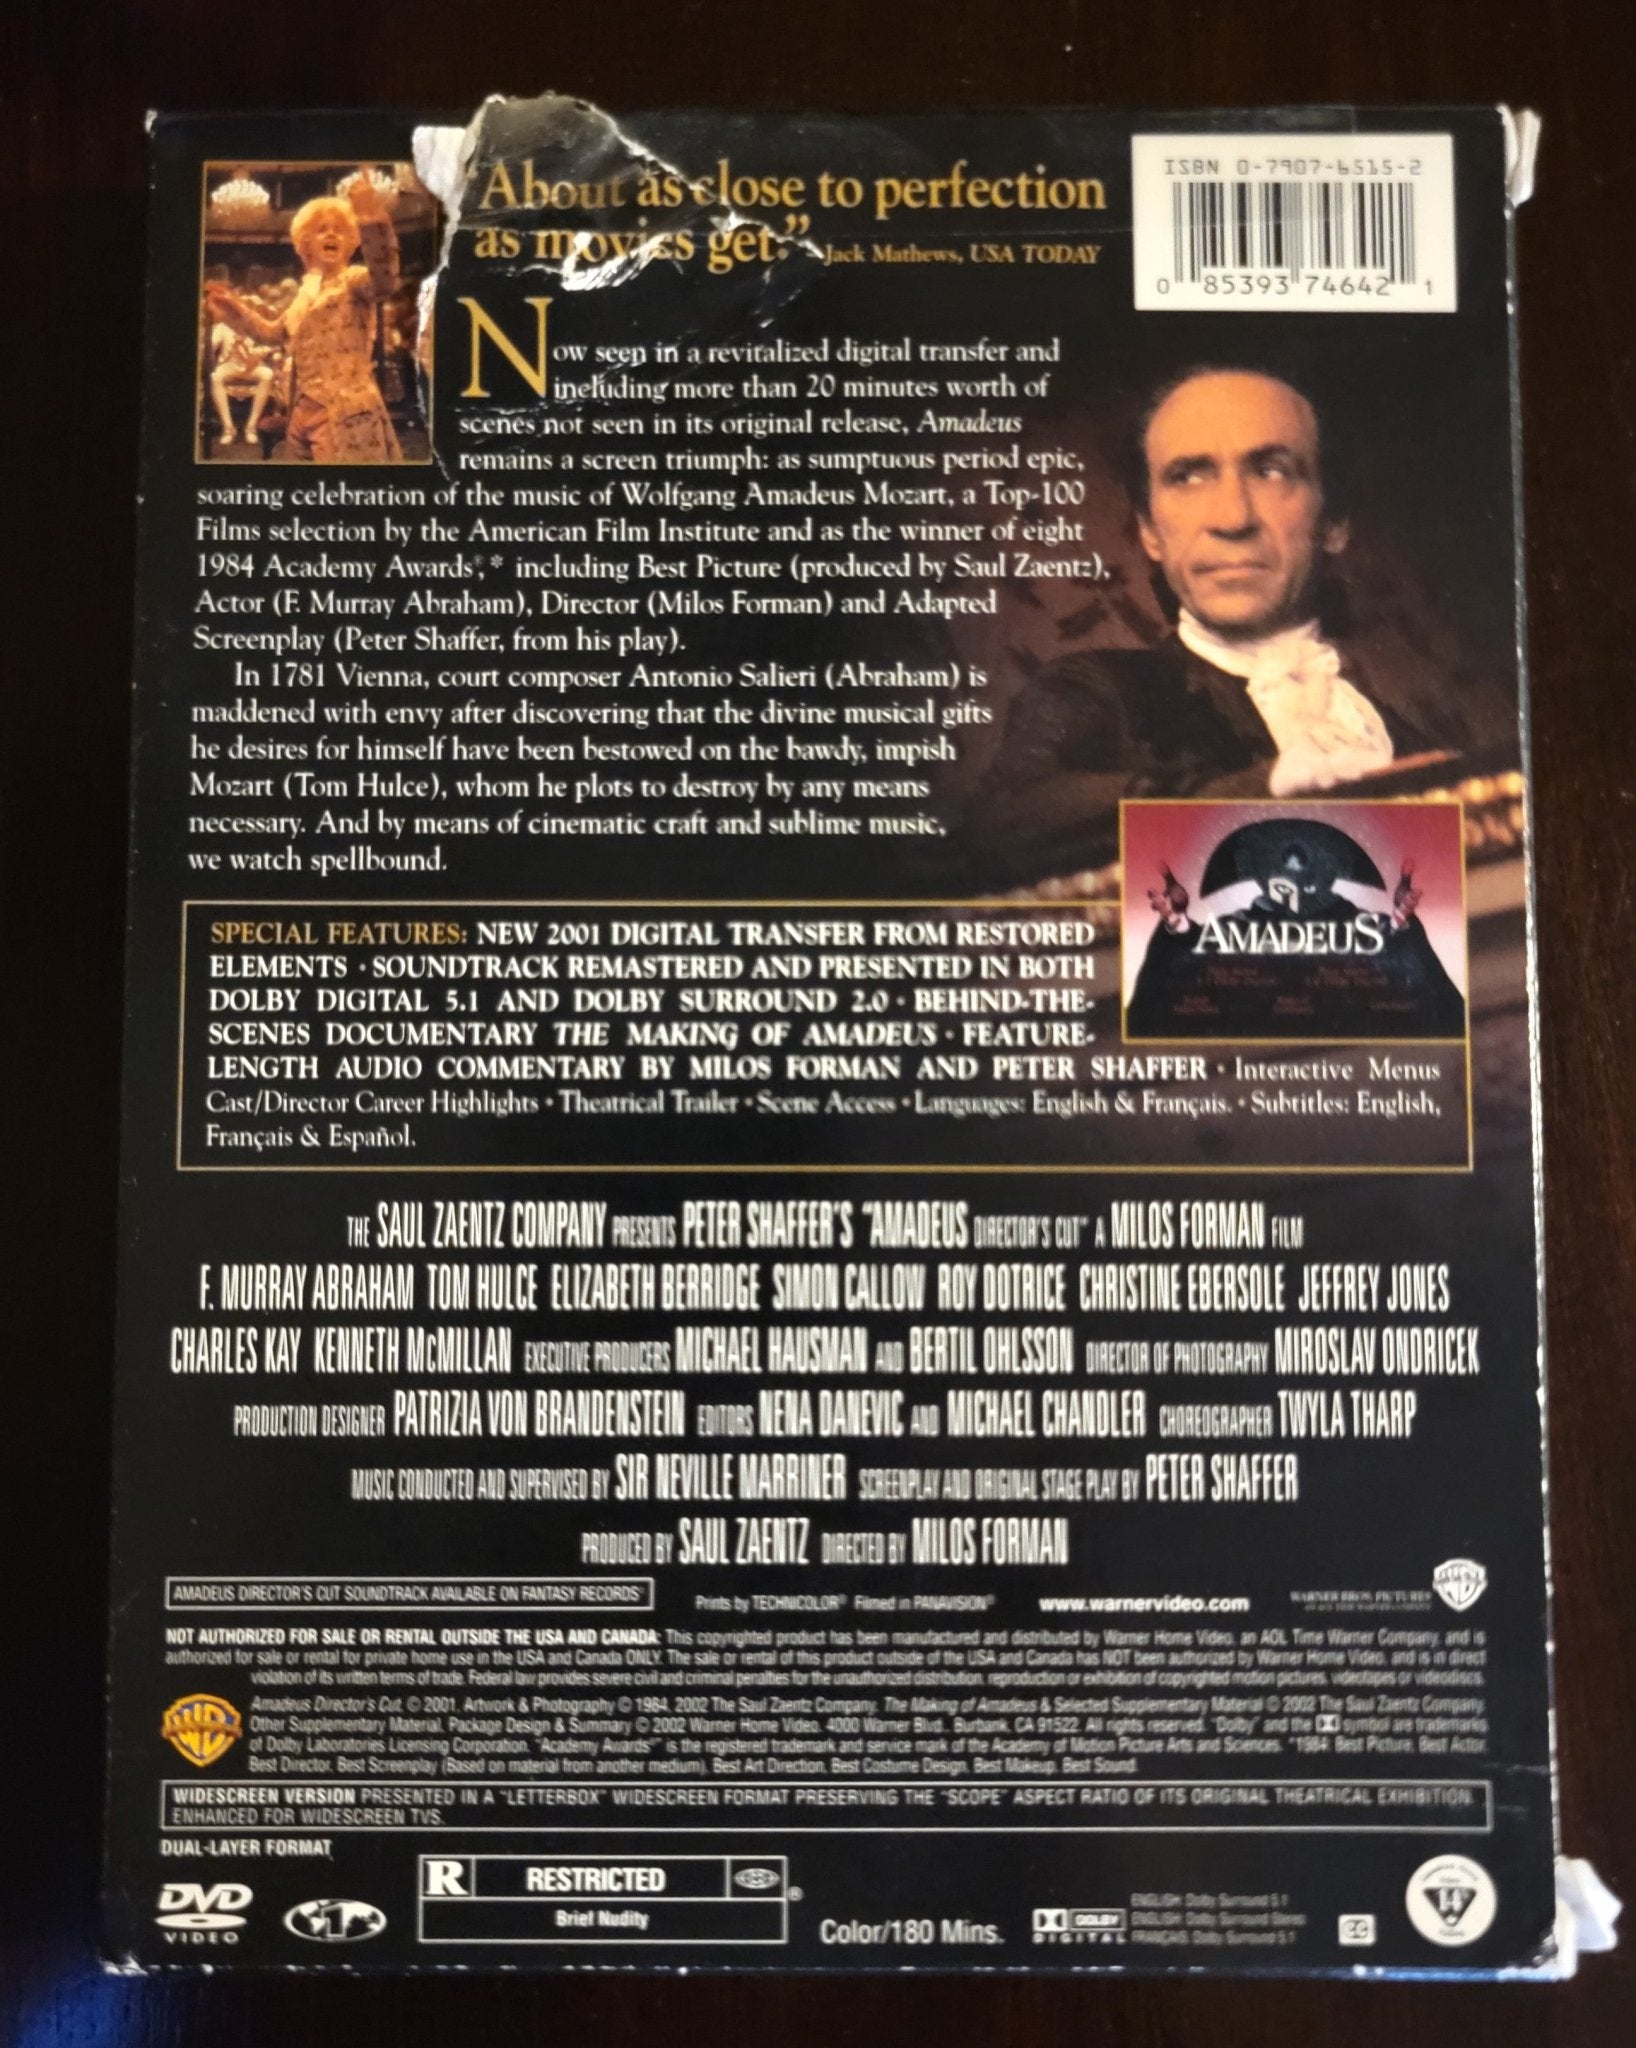 Warner Brothers - Amadeus | DVD | Director's Cut - 2 Disc Special Edition - DVD - Steady Bunny Shop